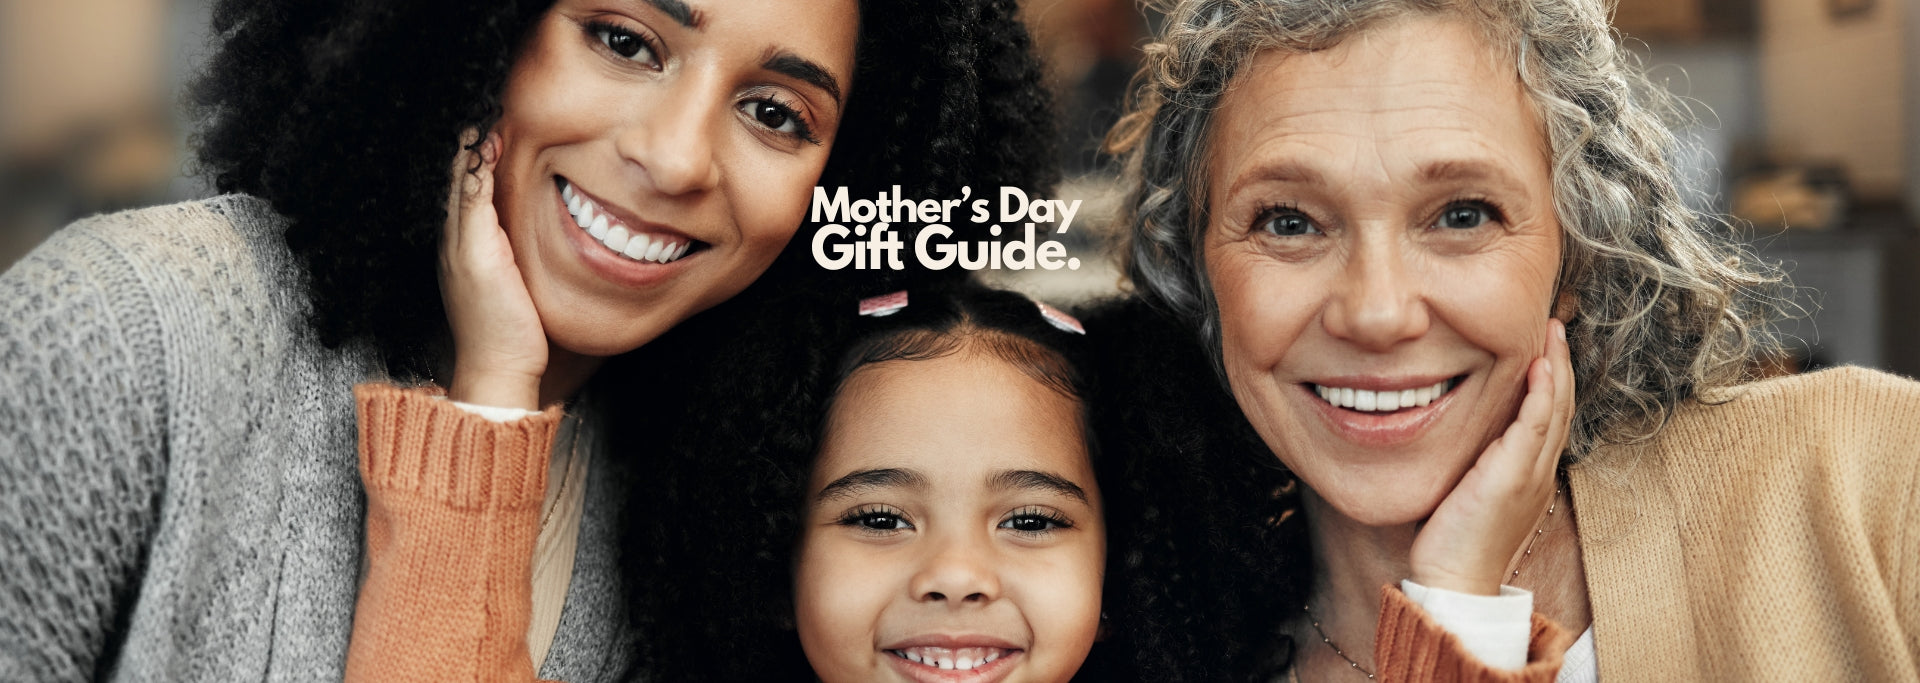 Our Top 5 Mother's Day Gift Guide